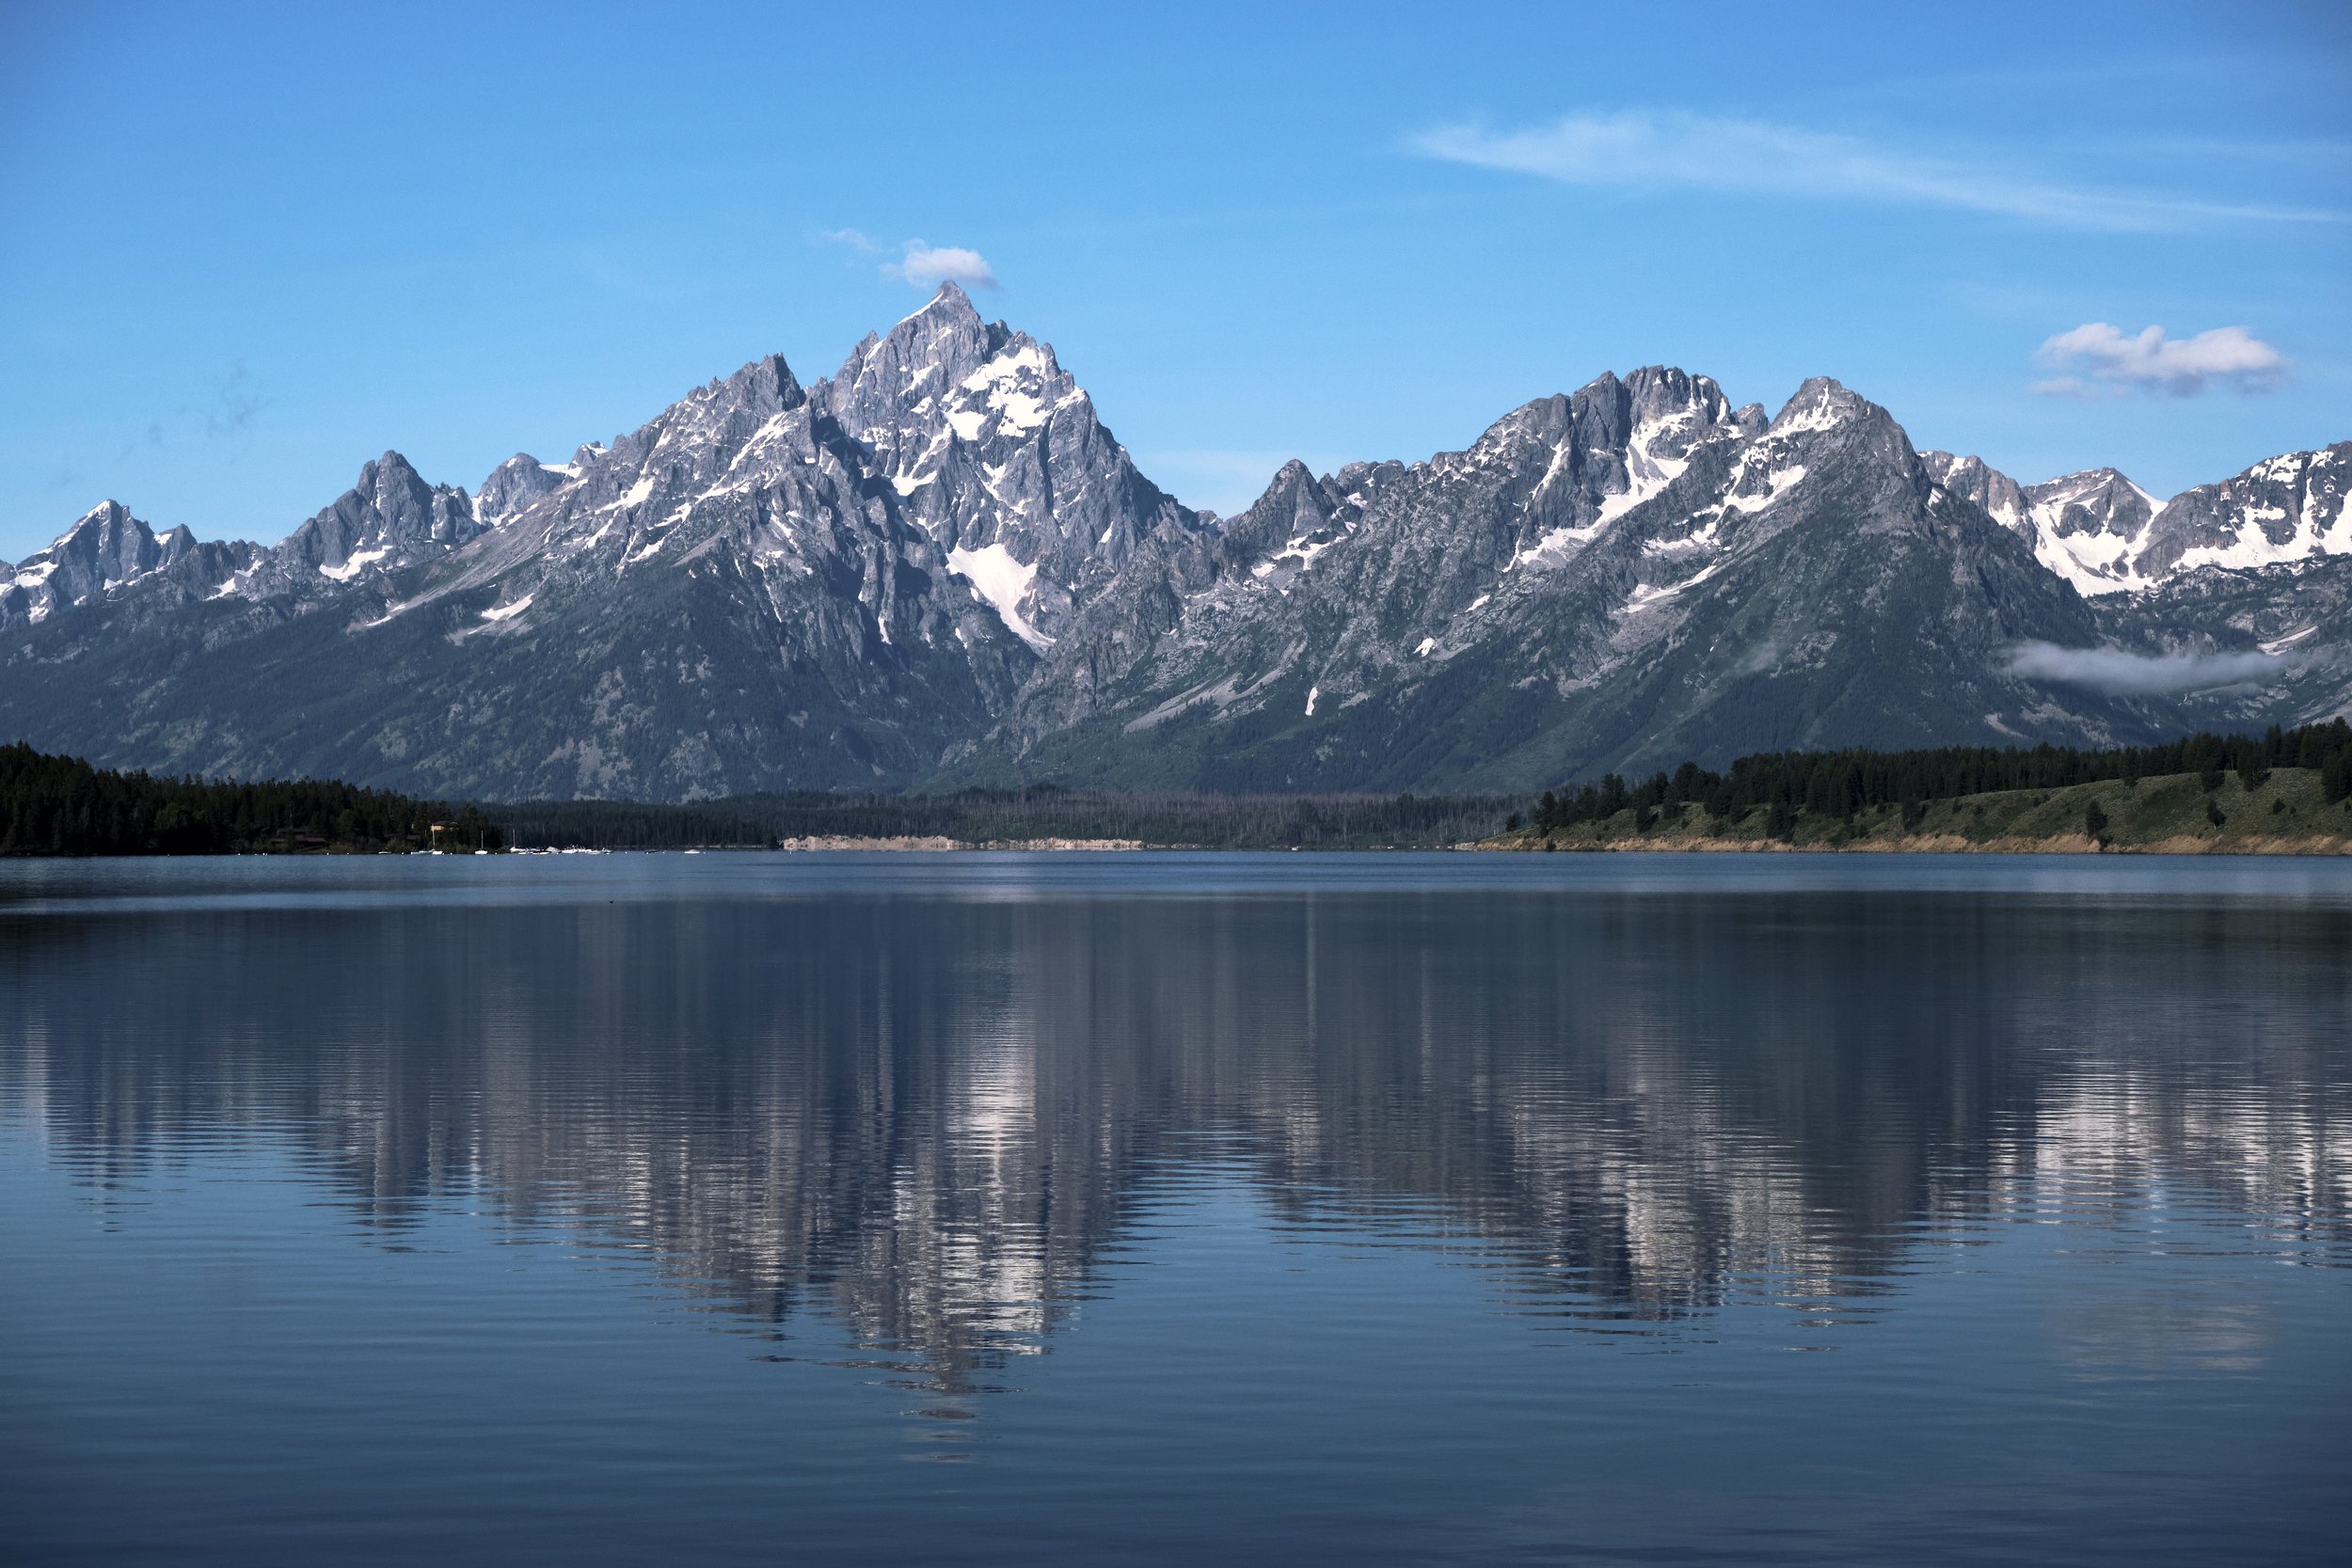  The Cathedral Group of the Grand Teton. 